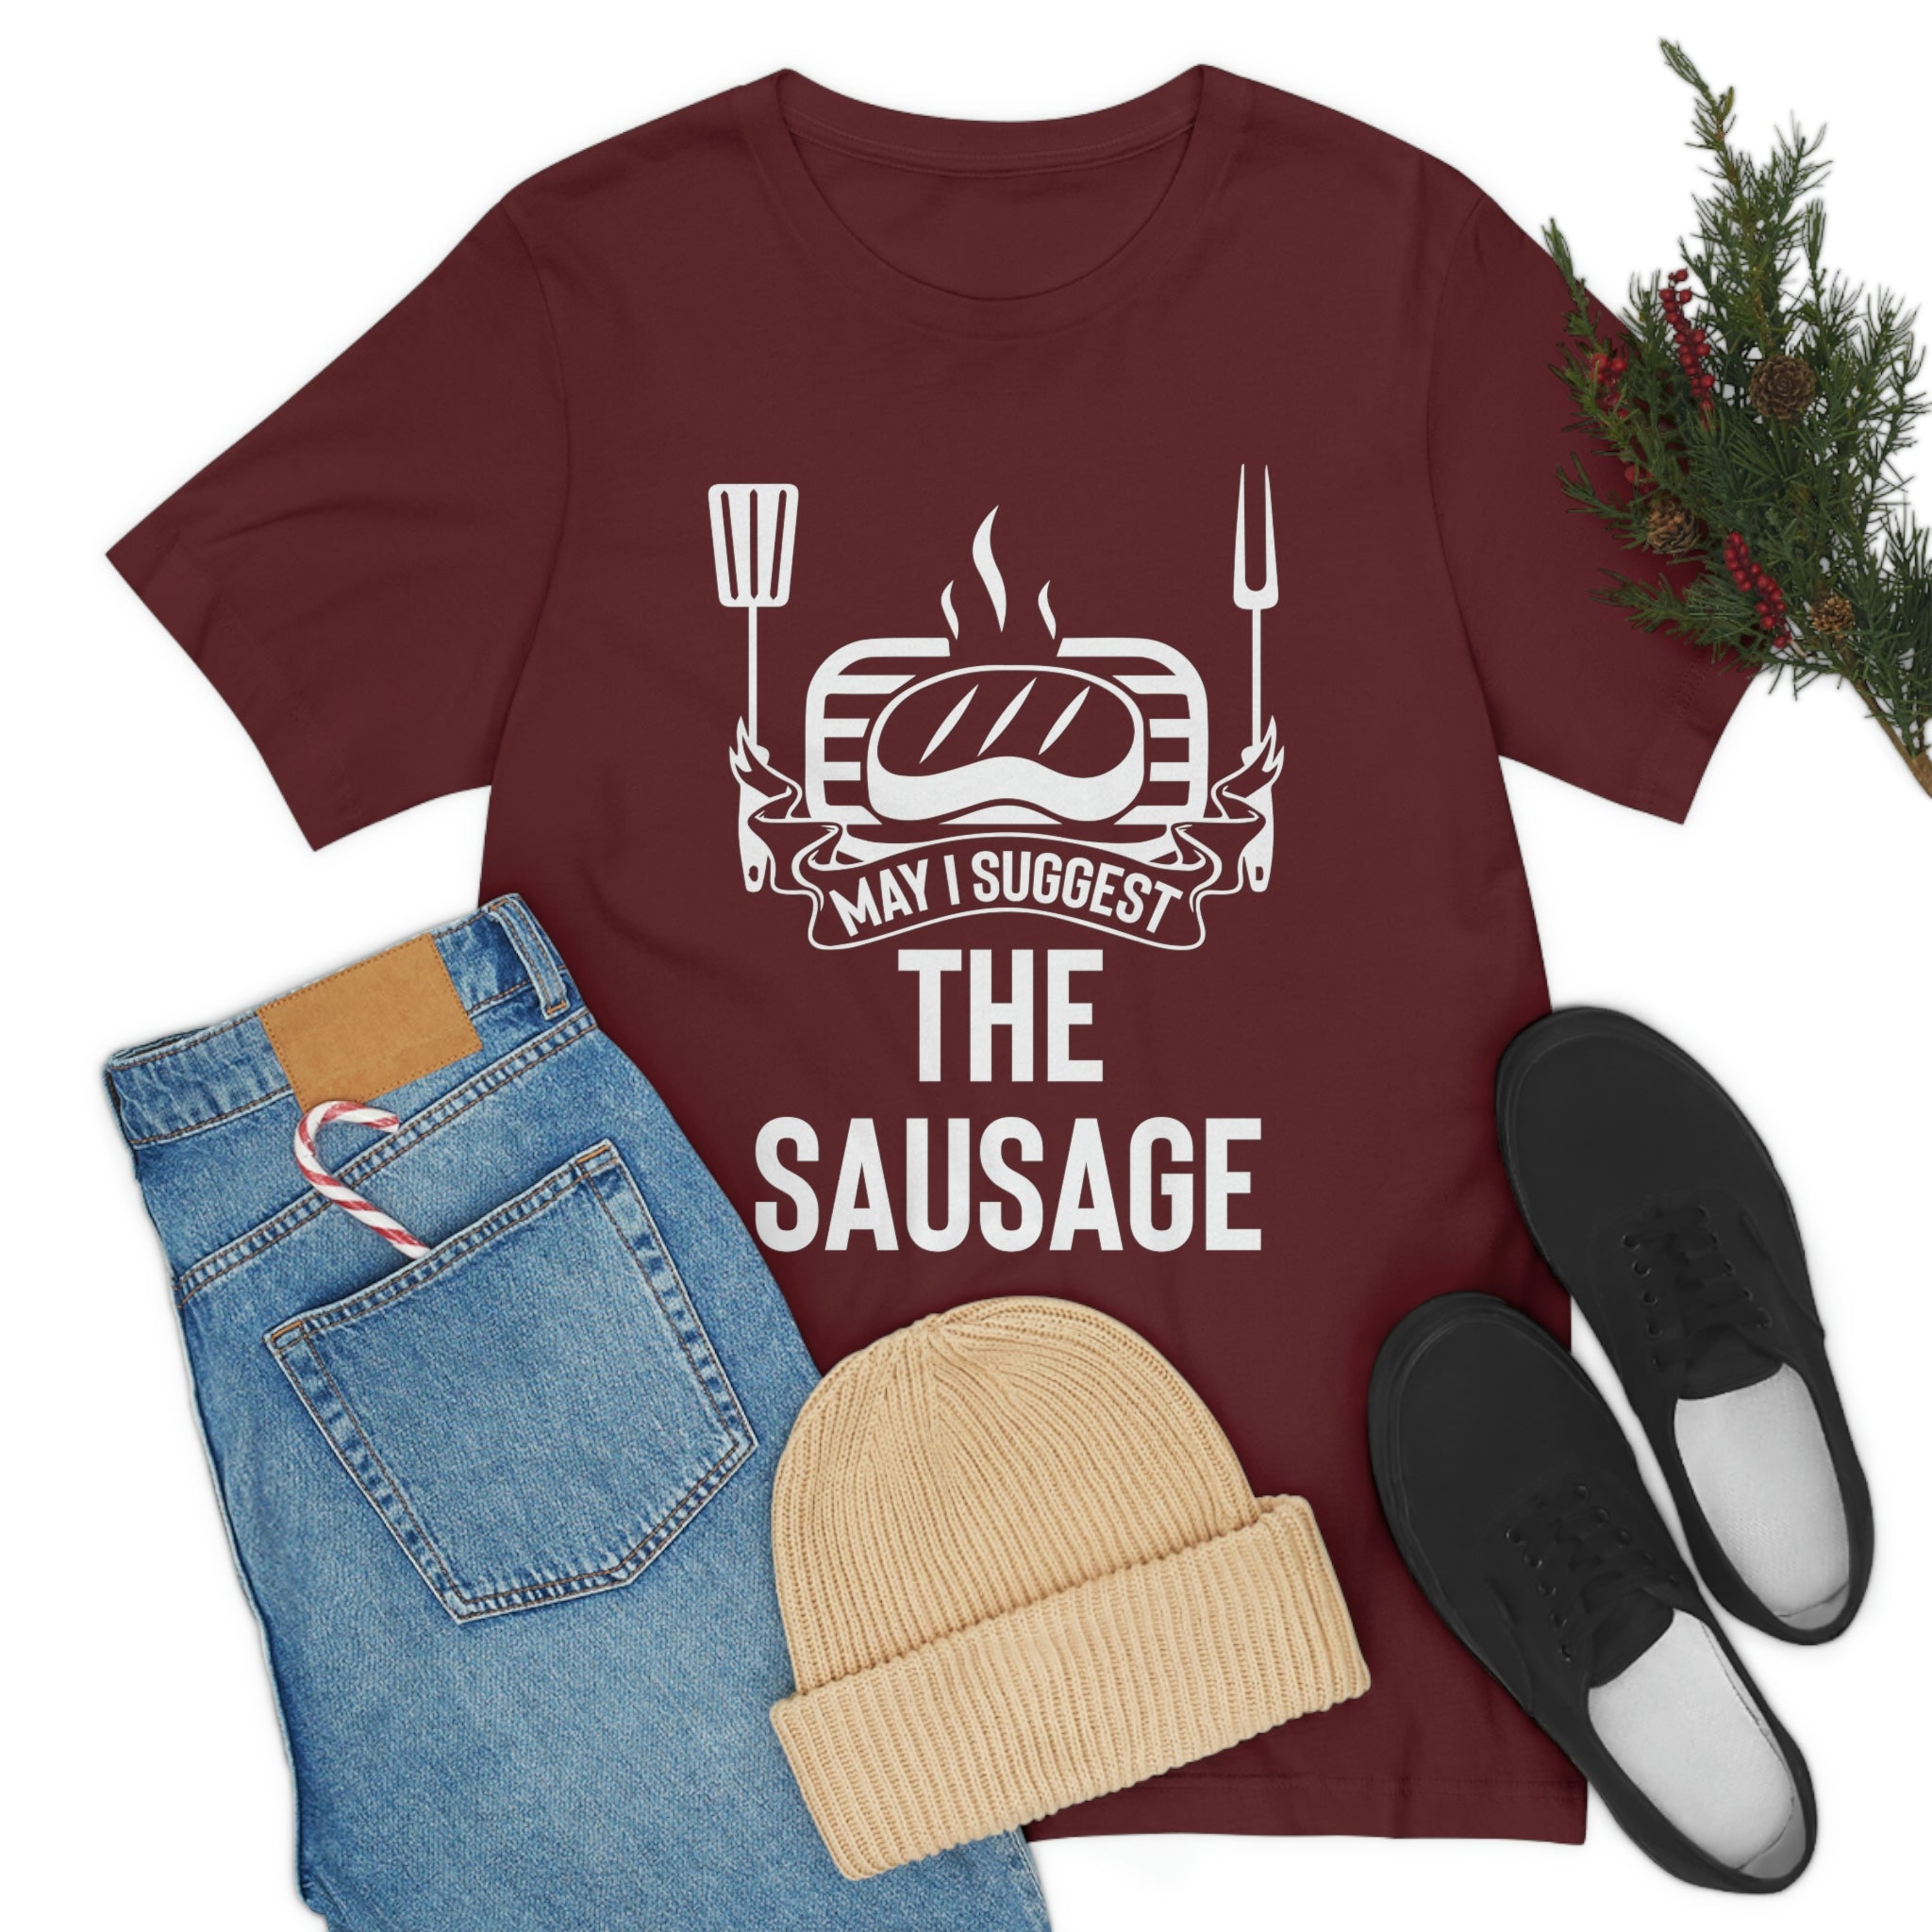 May I Suggest The Sausage T-shirt